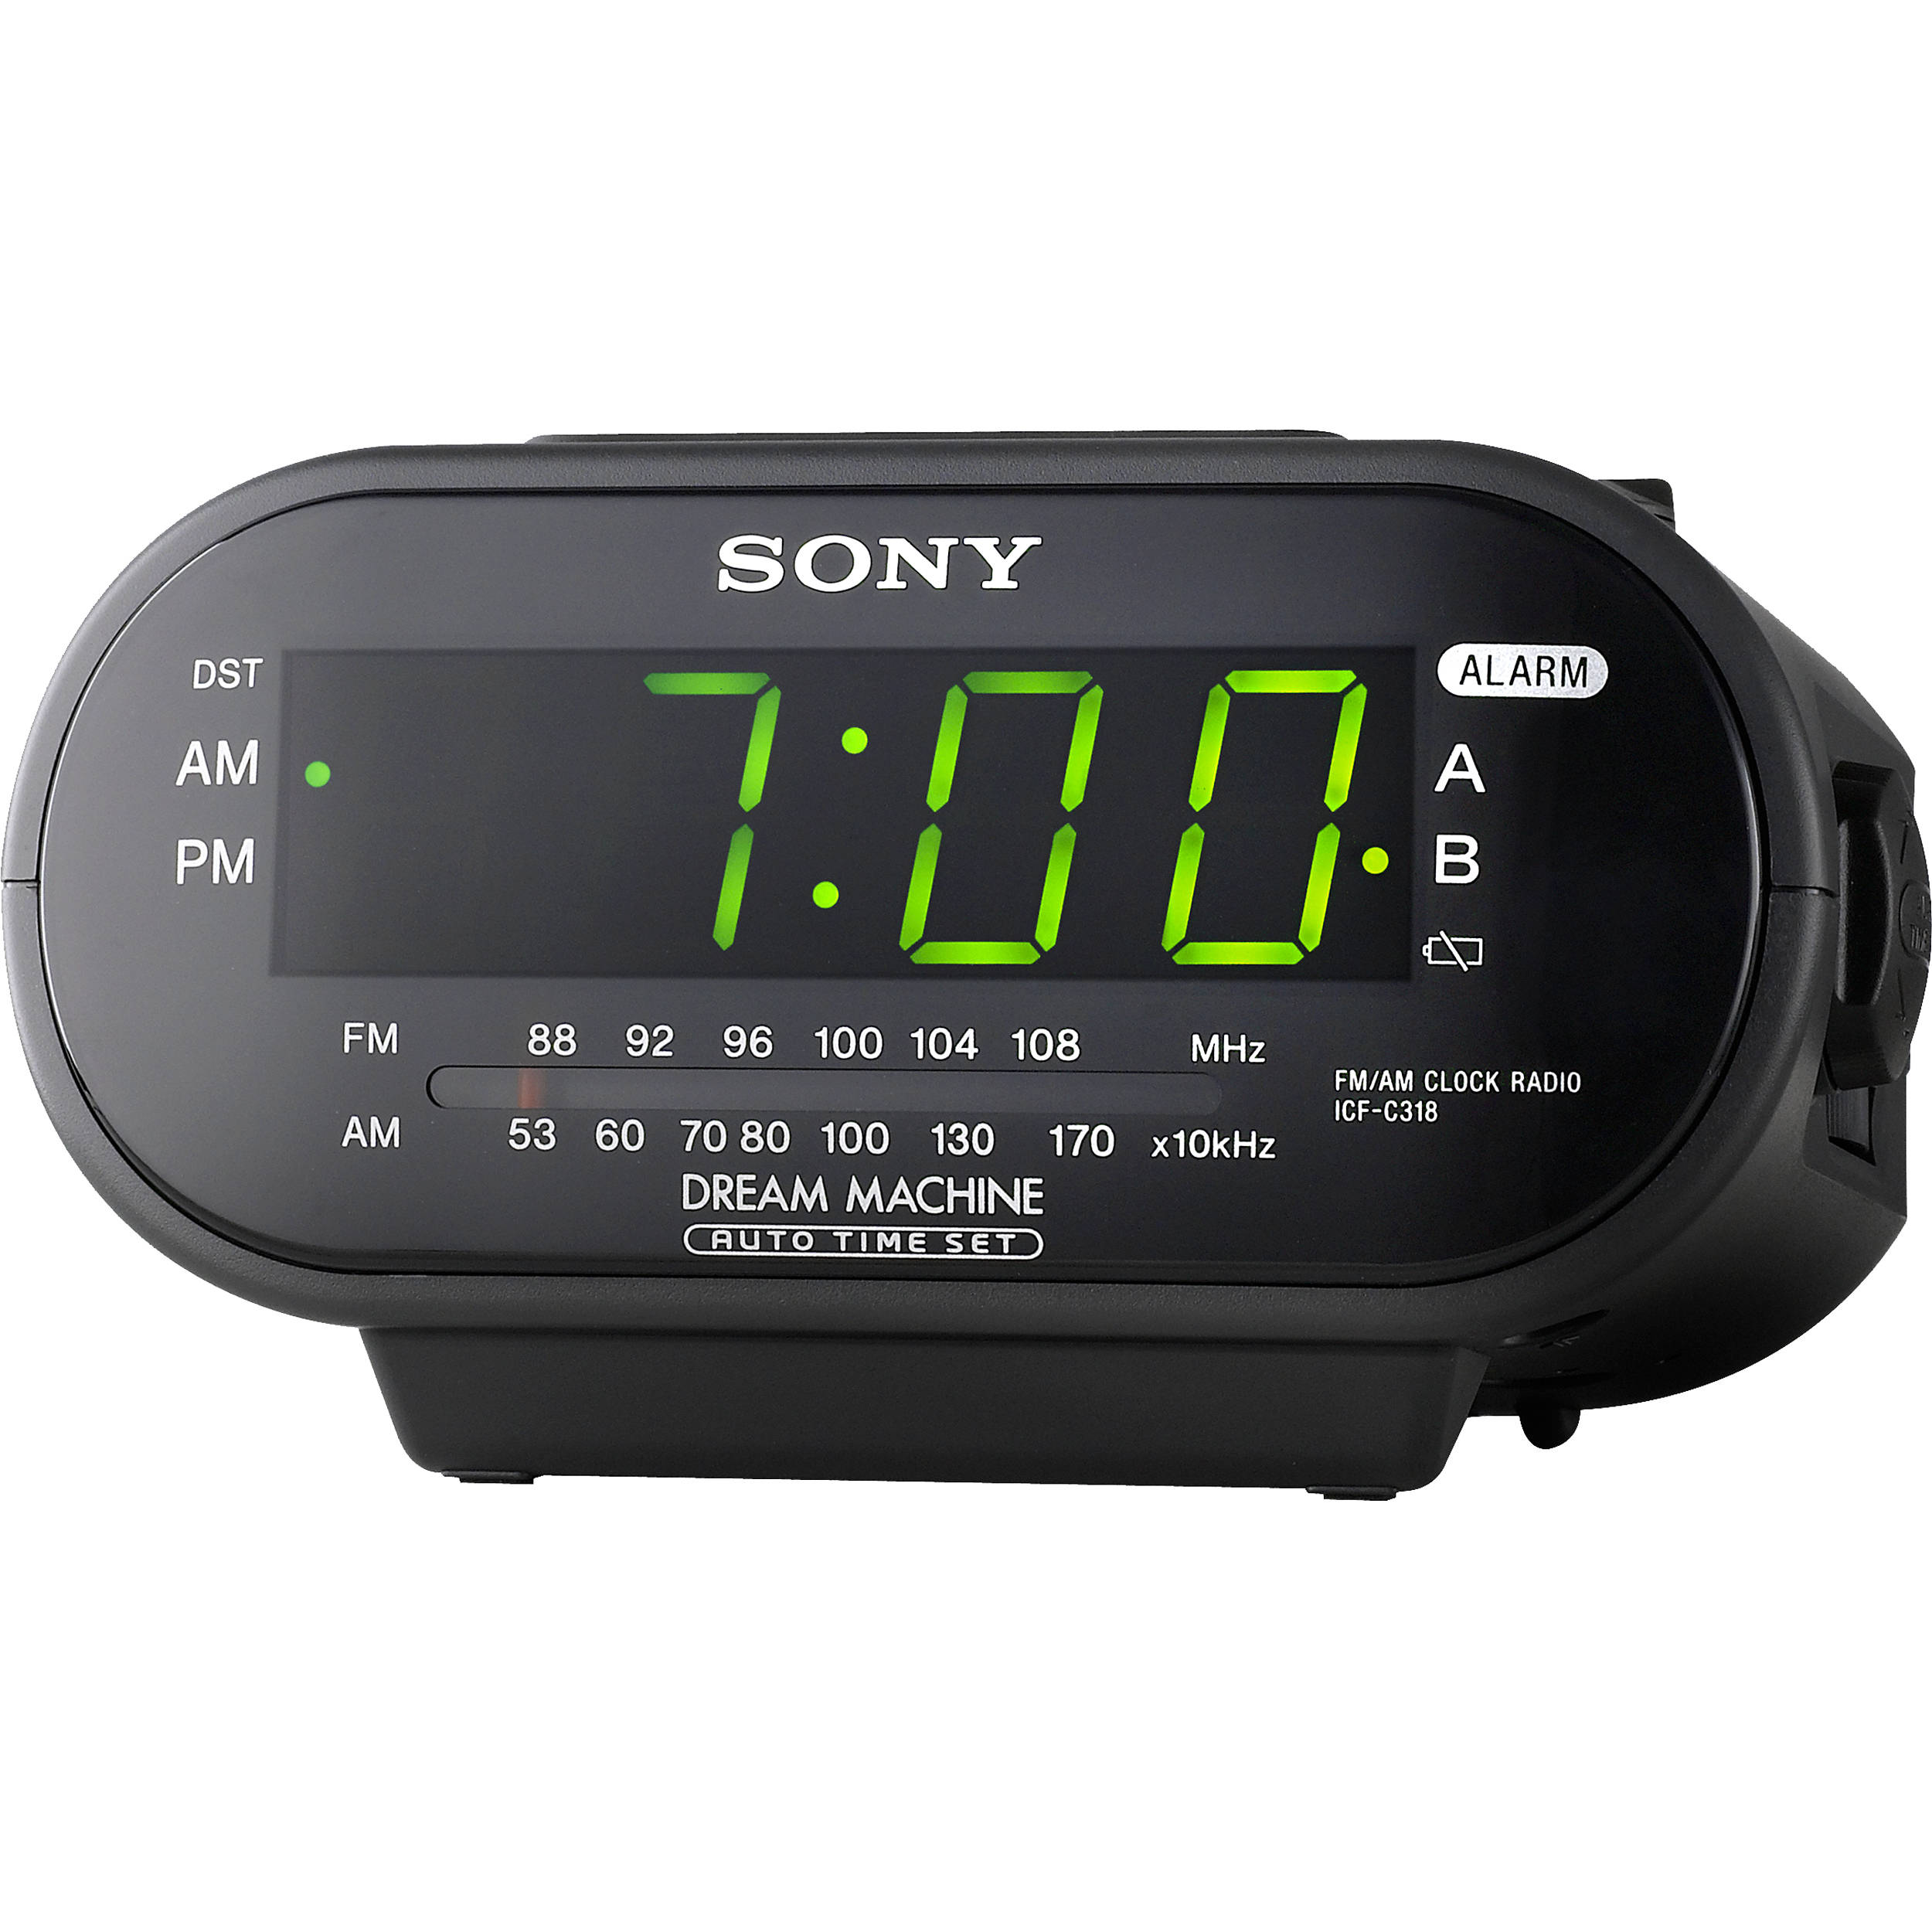 How To Set The Time On A Sony Alarm Clock